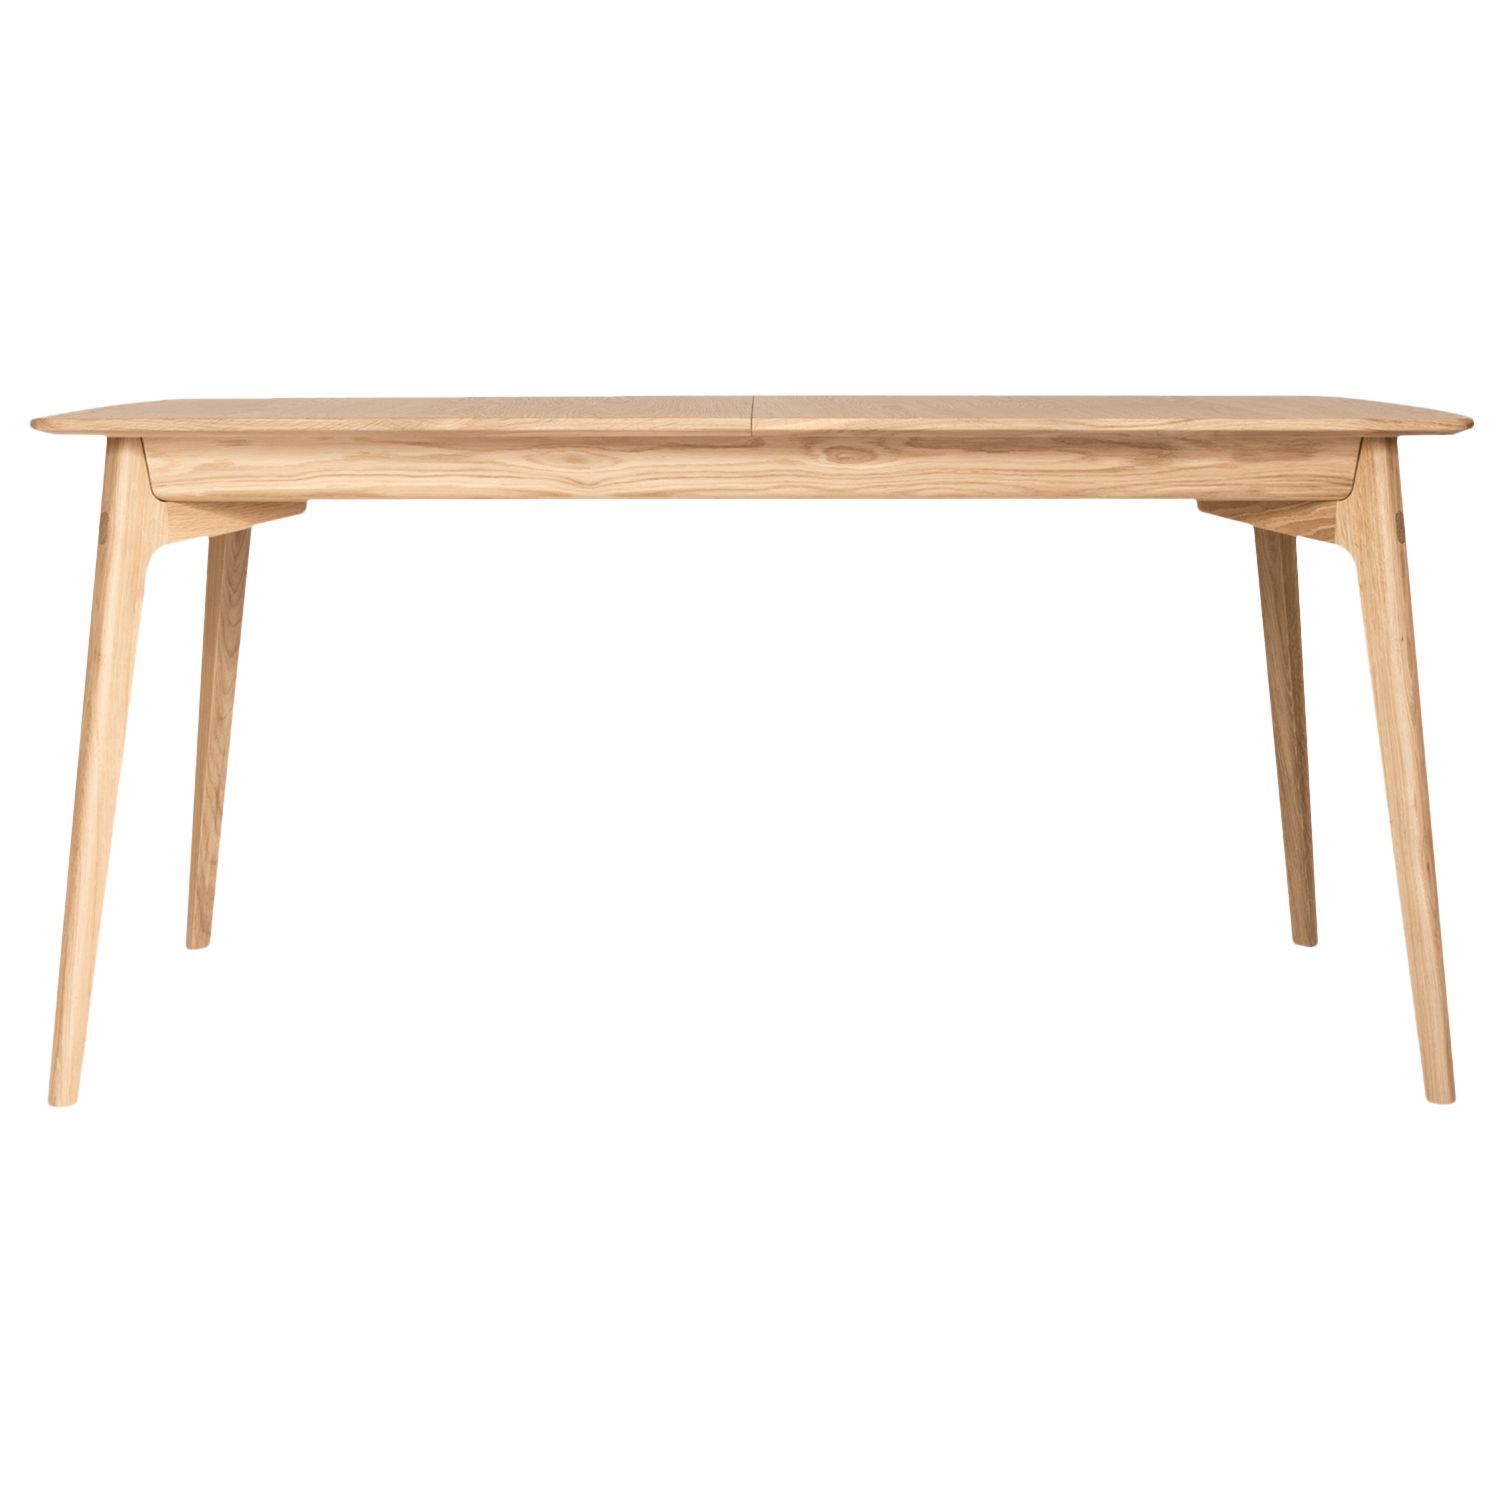 Photo of Matthew hilton for case dulwich 6-10 seater extending dining table oak